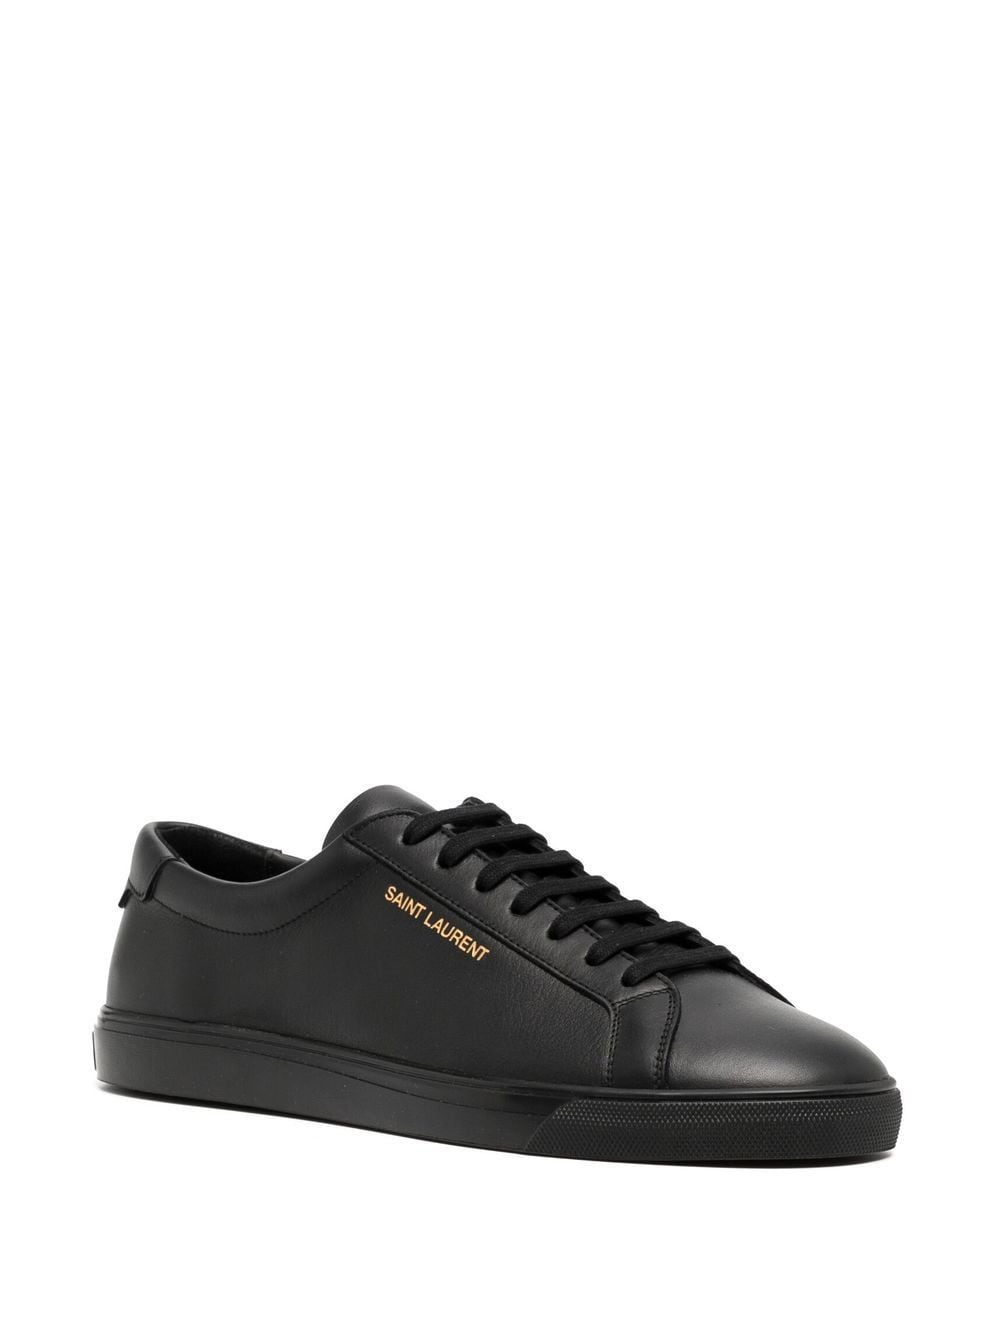 Image 2 of Saint Laurent Andy leather low-top sneakers